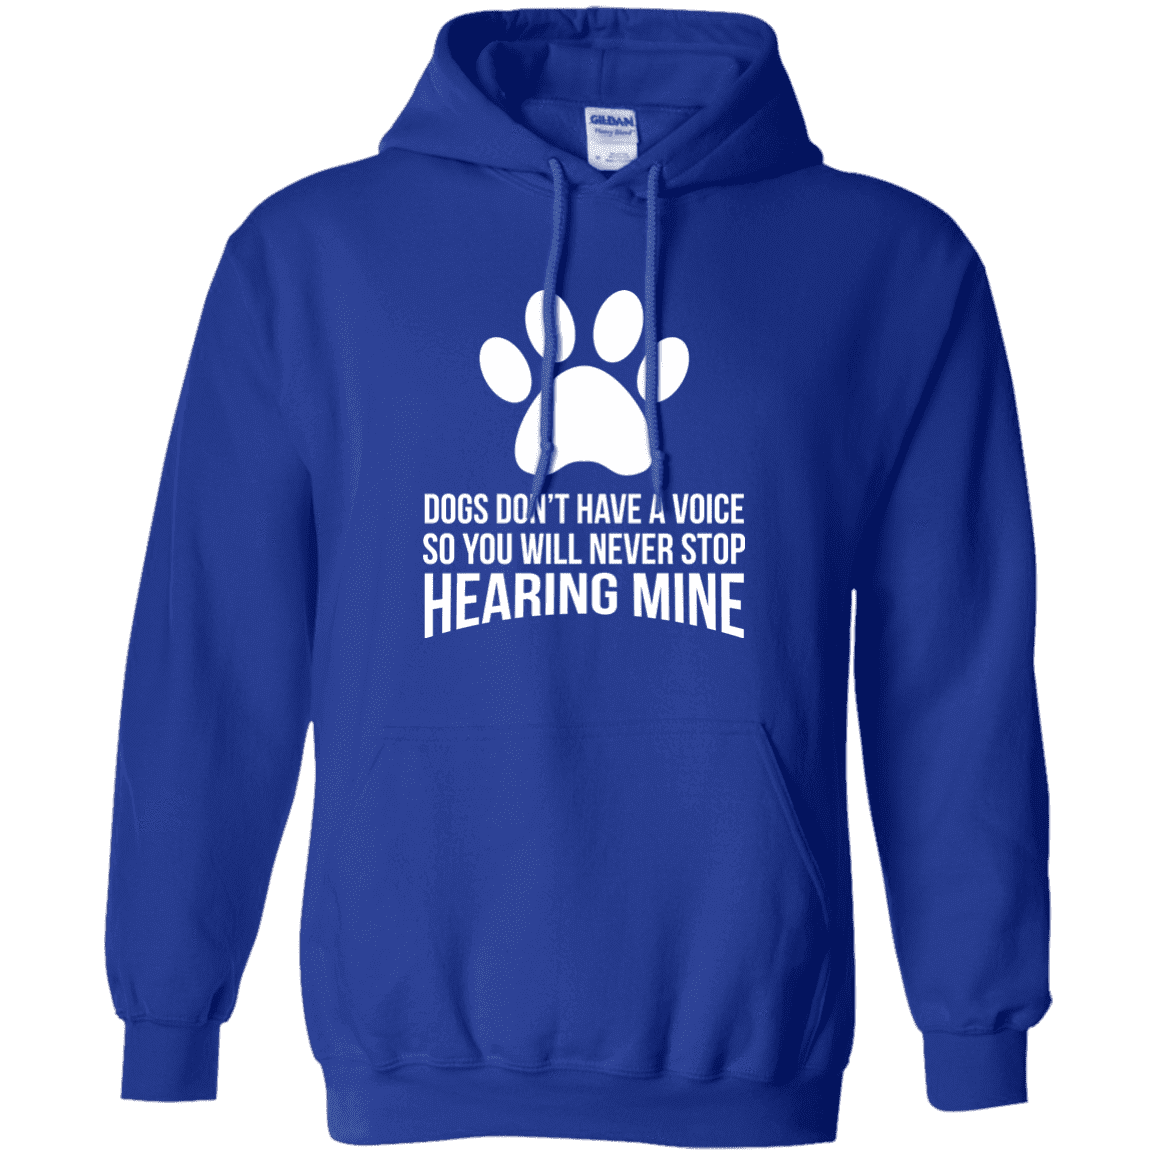 Dogs Don't Have A Voice - Hoodie.